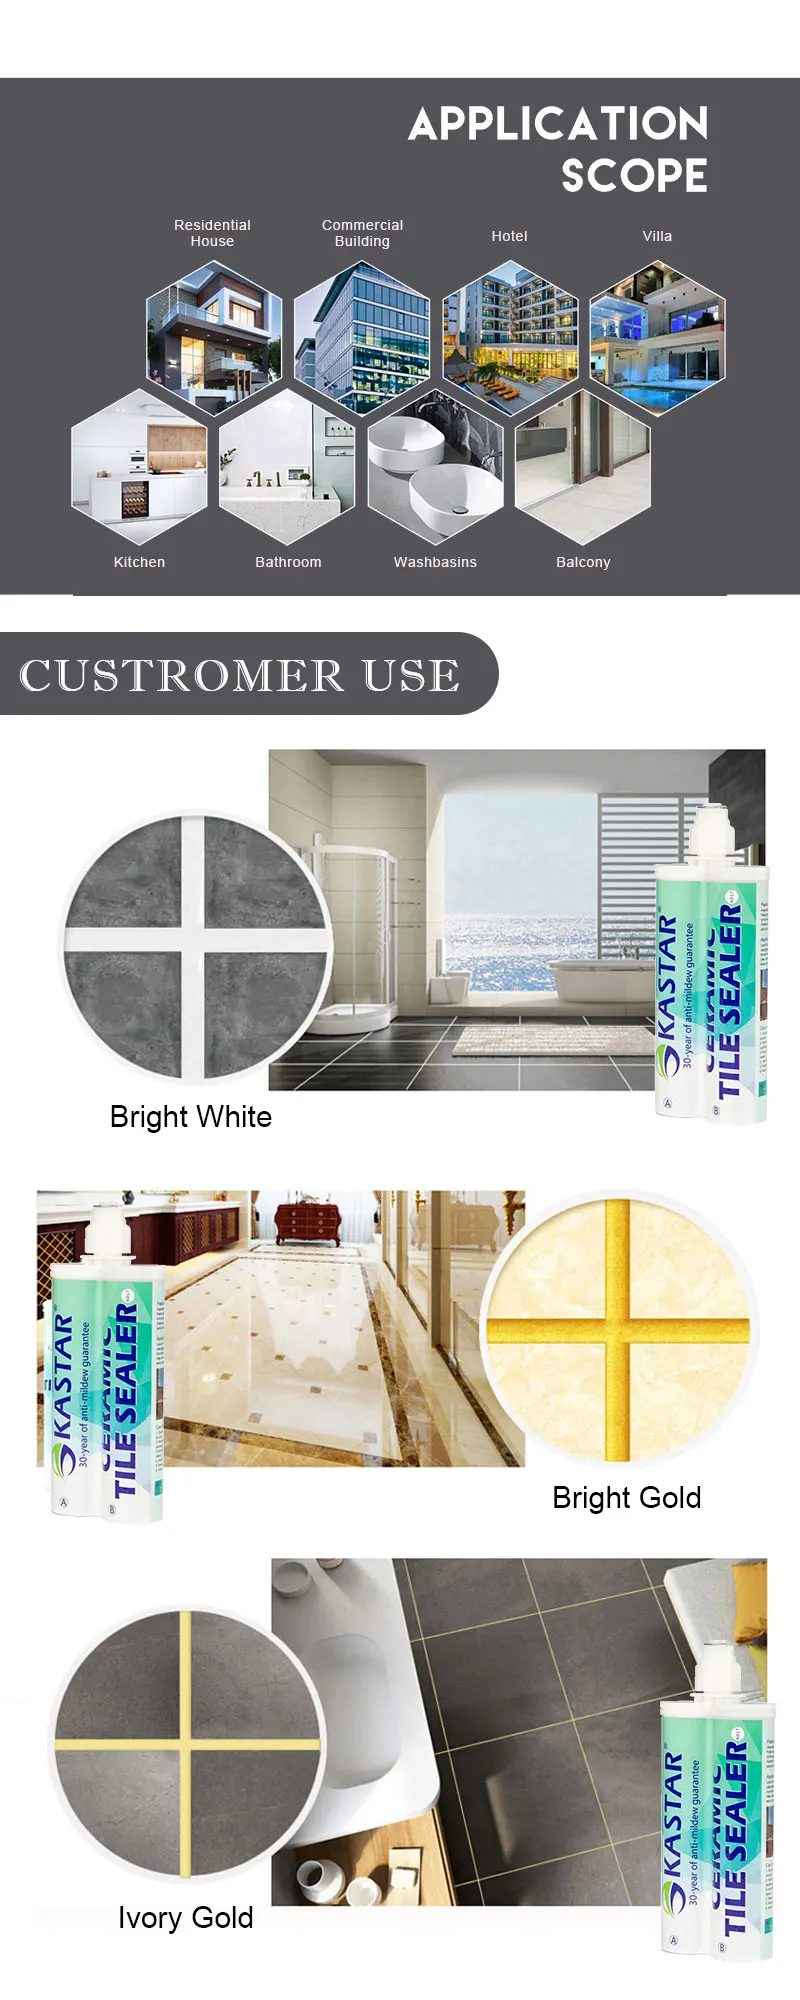 China Wholesale Price Waterproof Wall Cement Tile Adhesive For Bathroom Remodeling